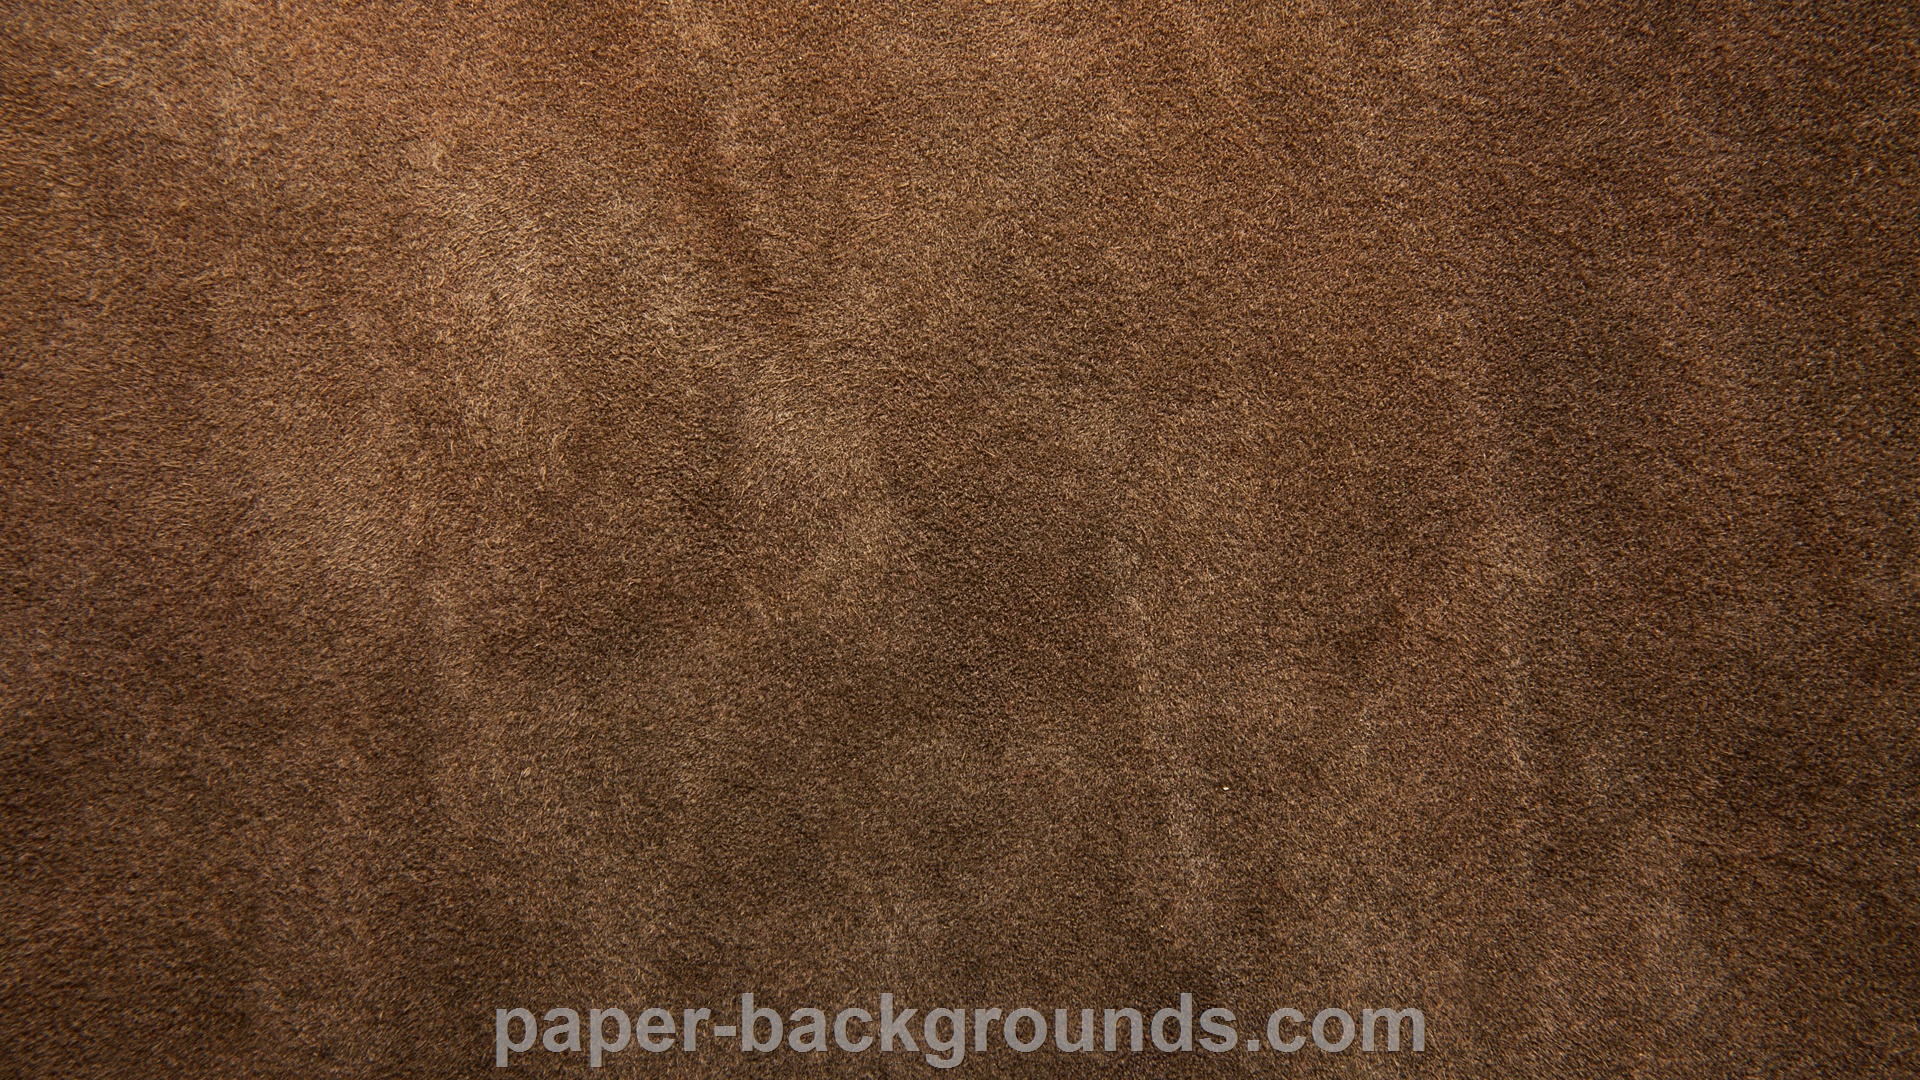 Paper Backgrounds | skin | Royalty Free HD Paper Backgrounds